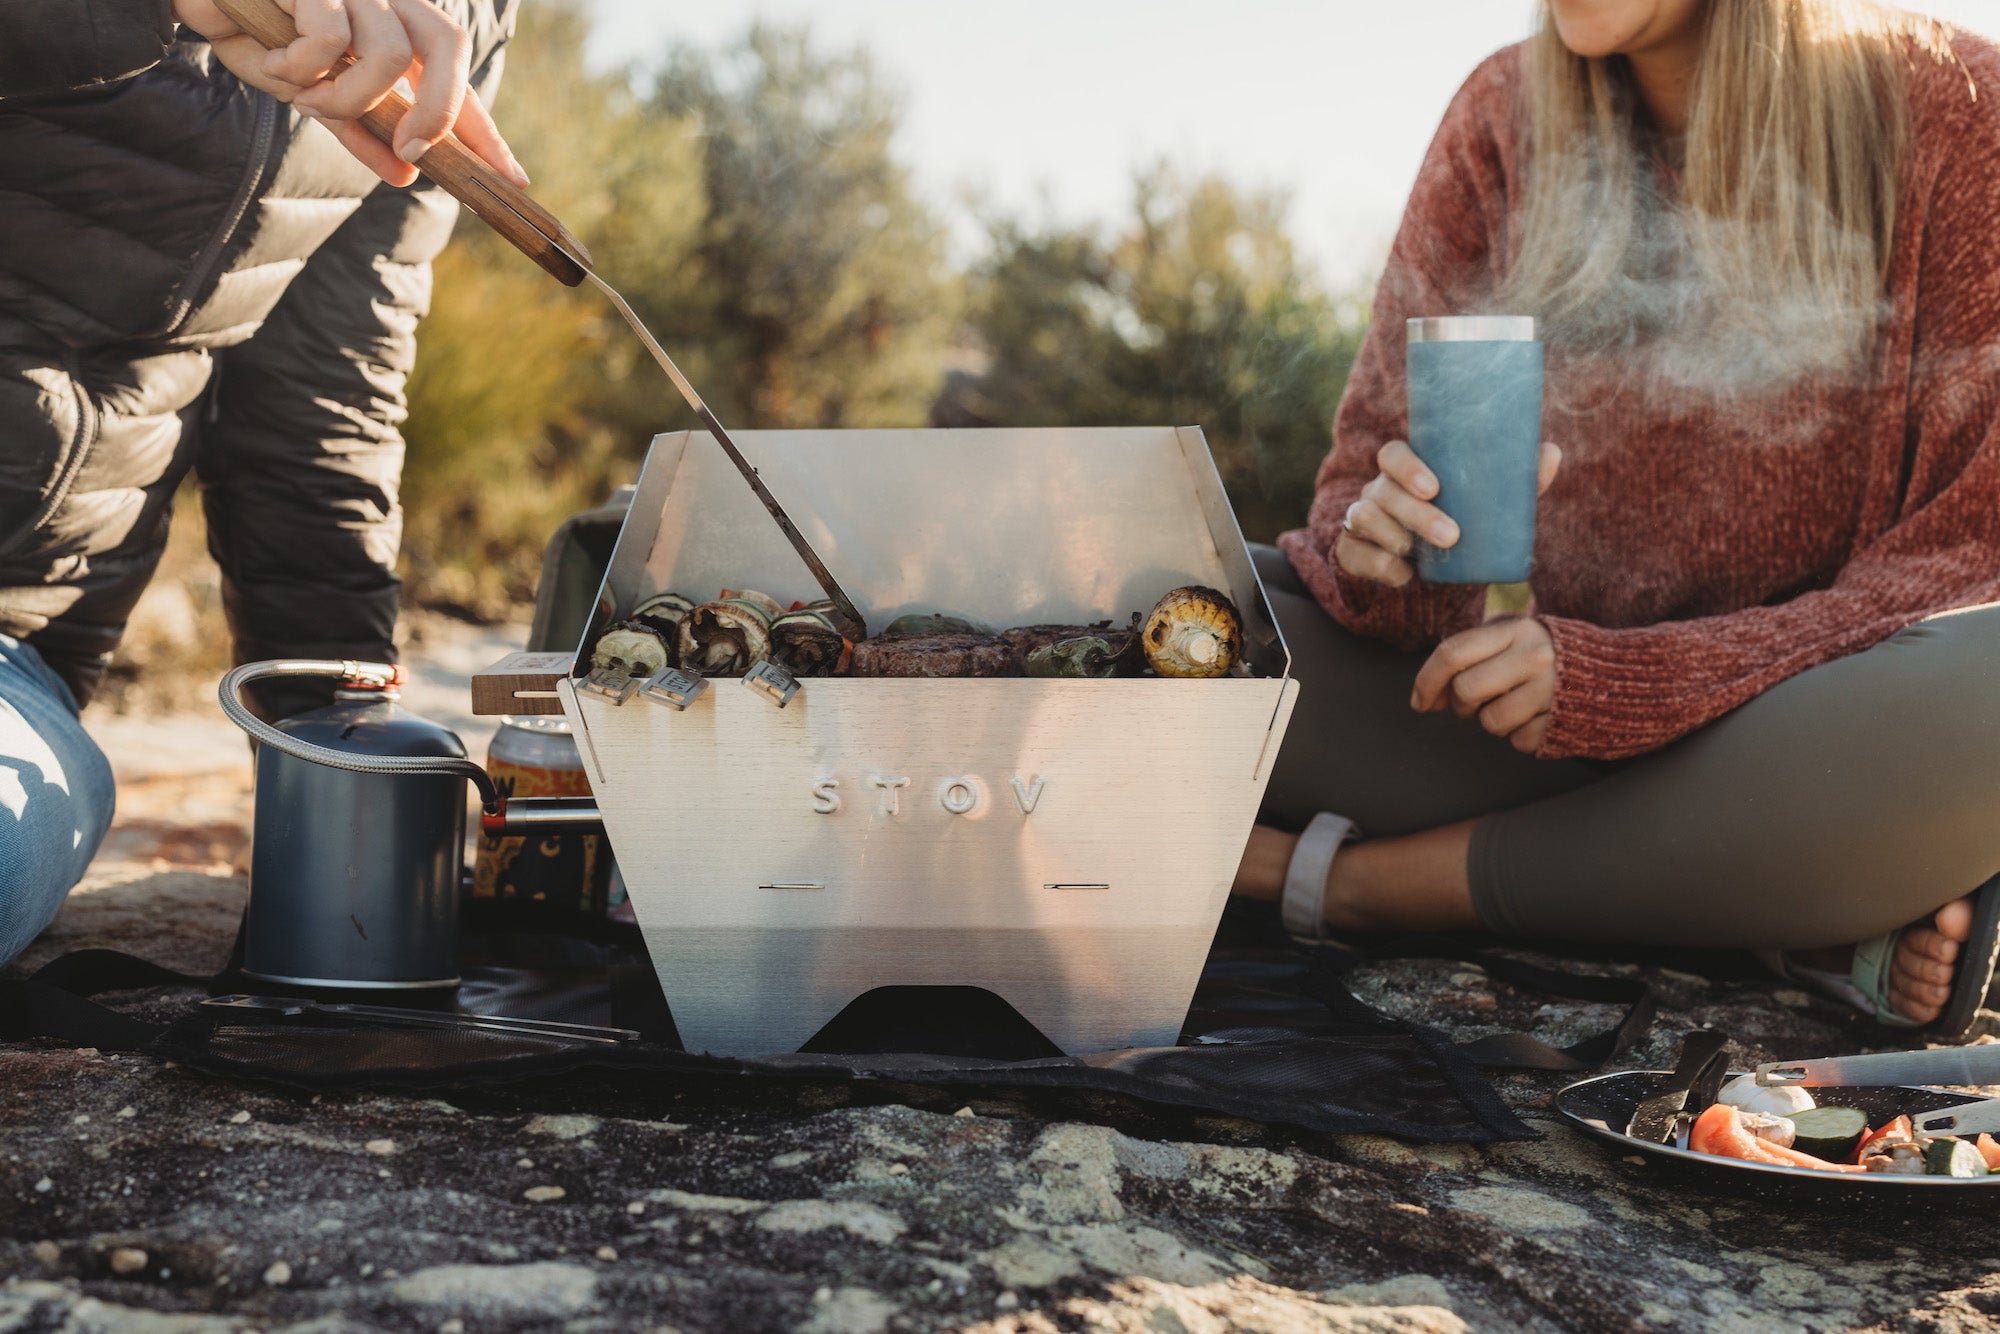 Two people cooking on compact STOV BBQ while outdoors